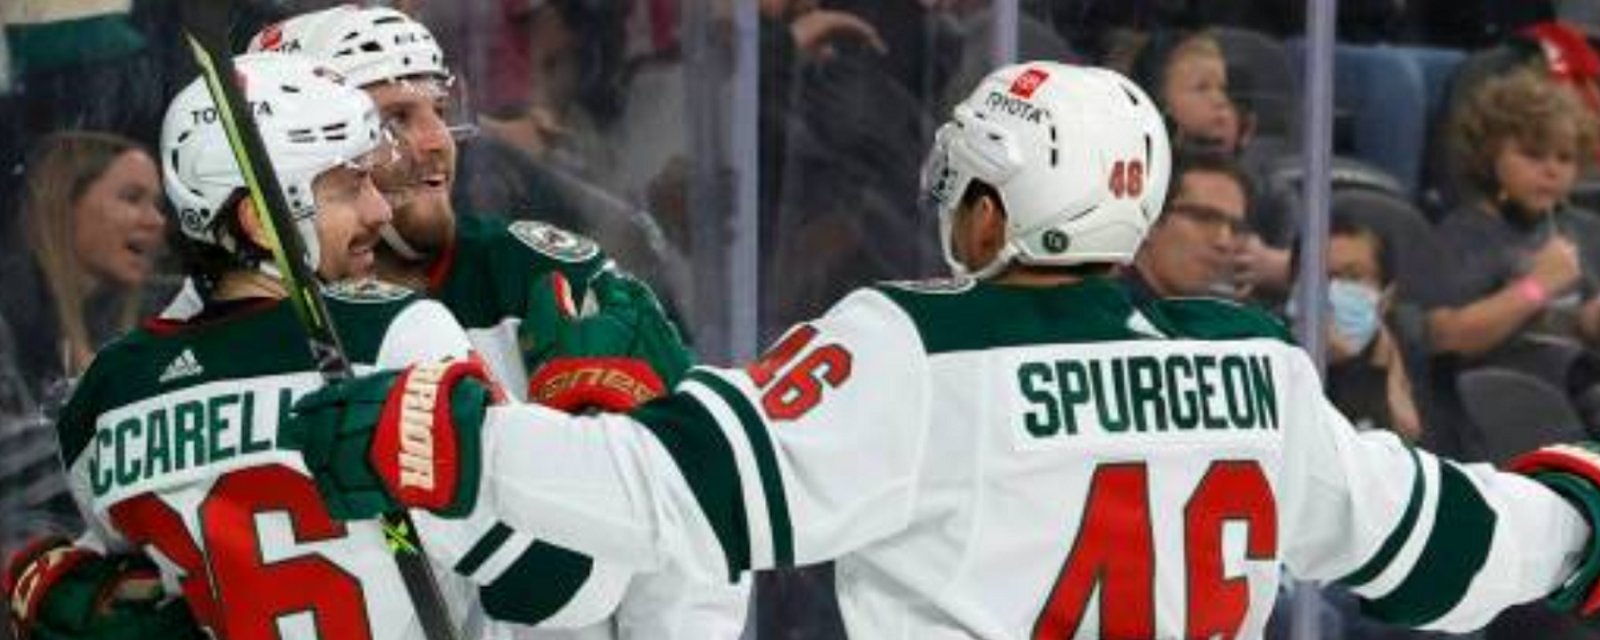 Wild's Spurgeon and Zuccarello headed for surgery.